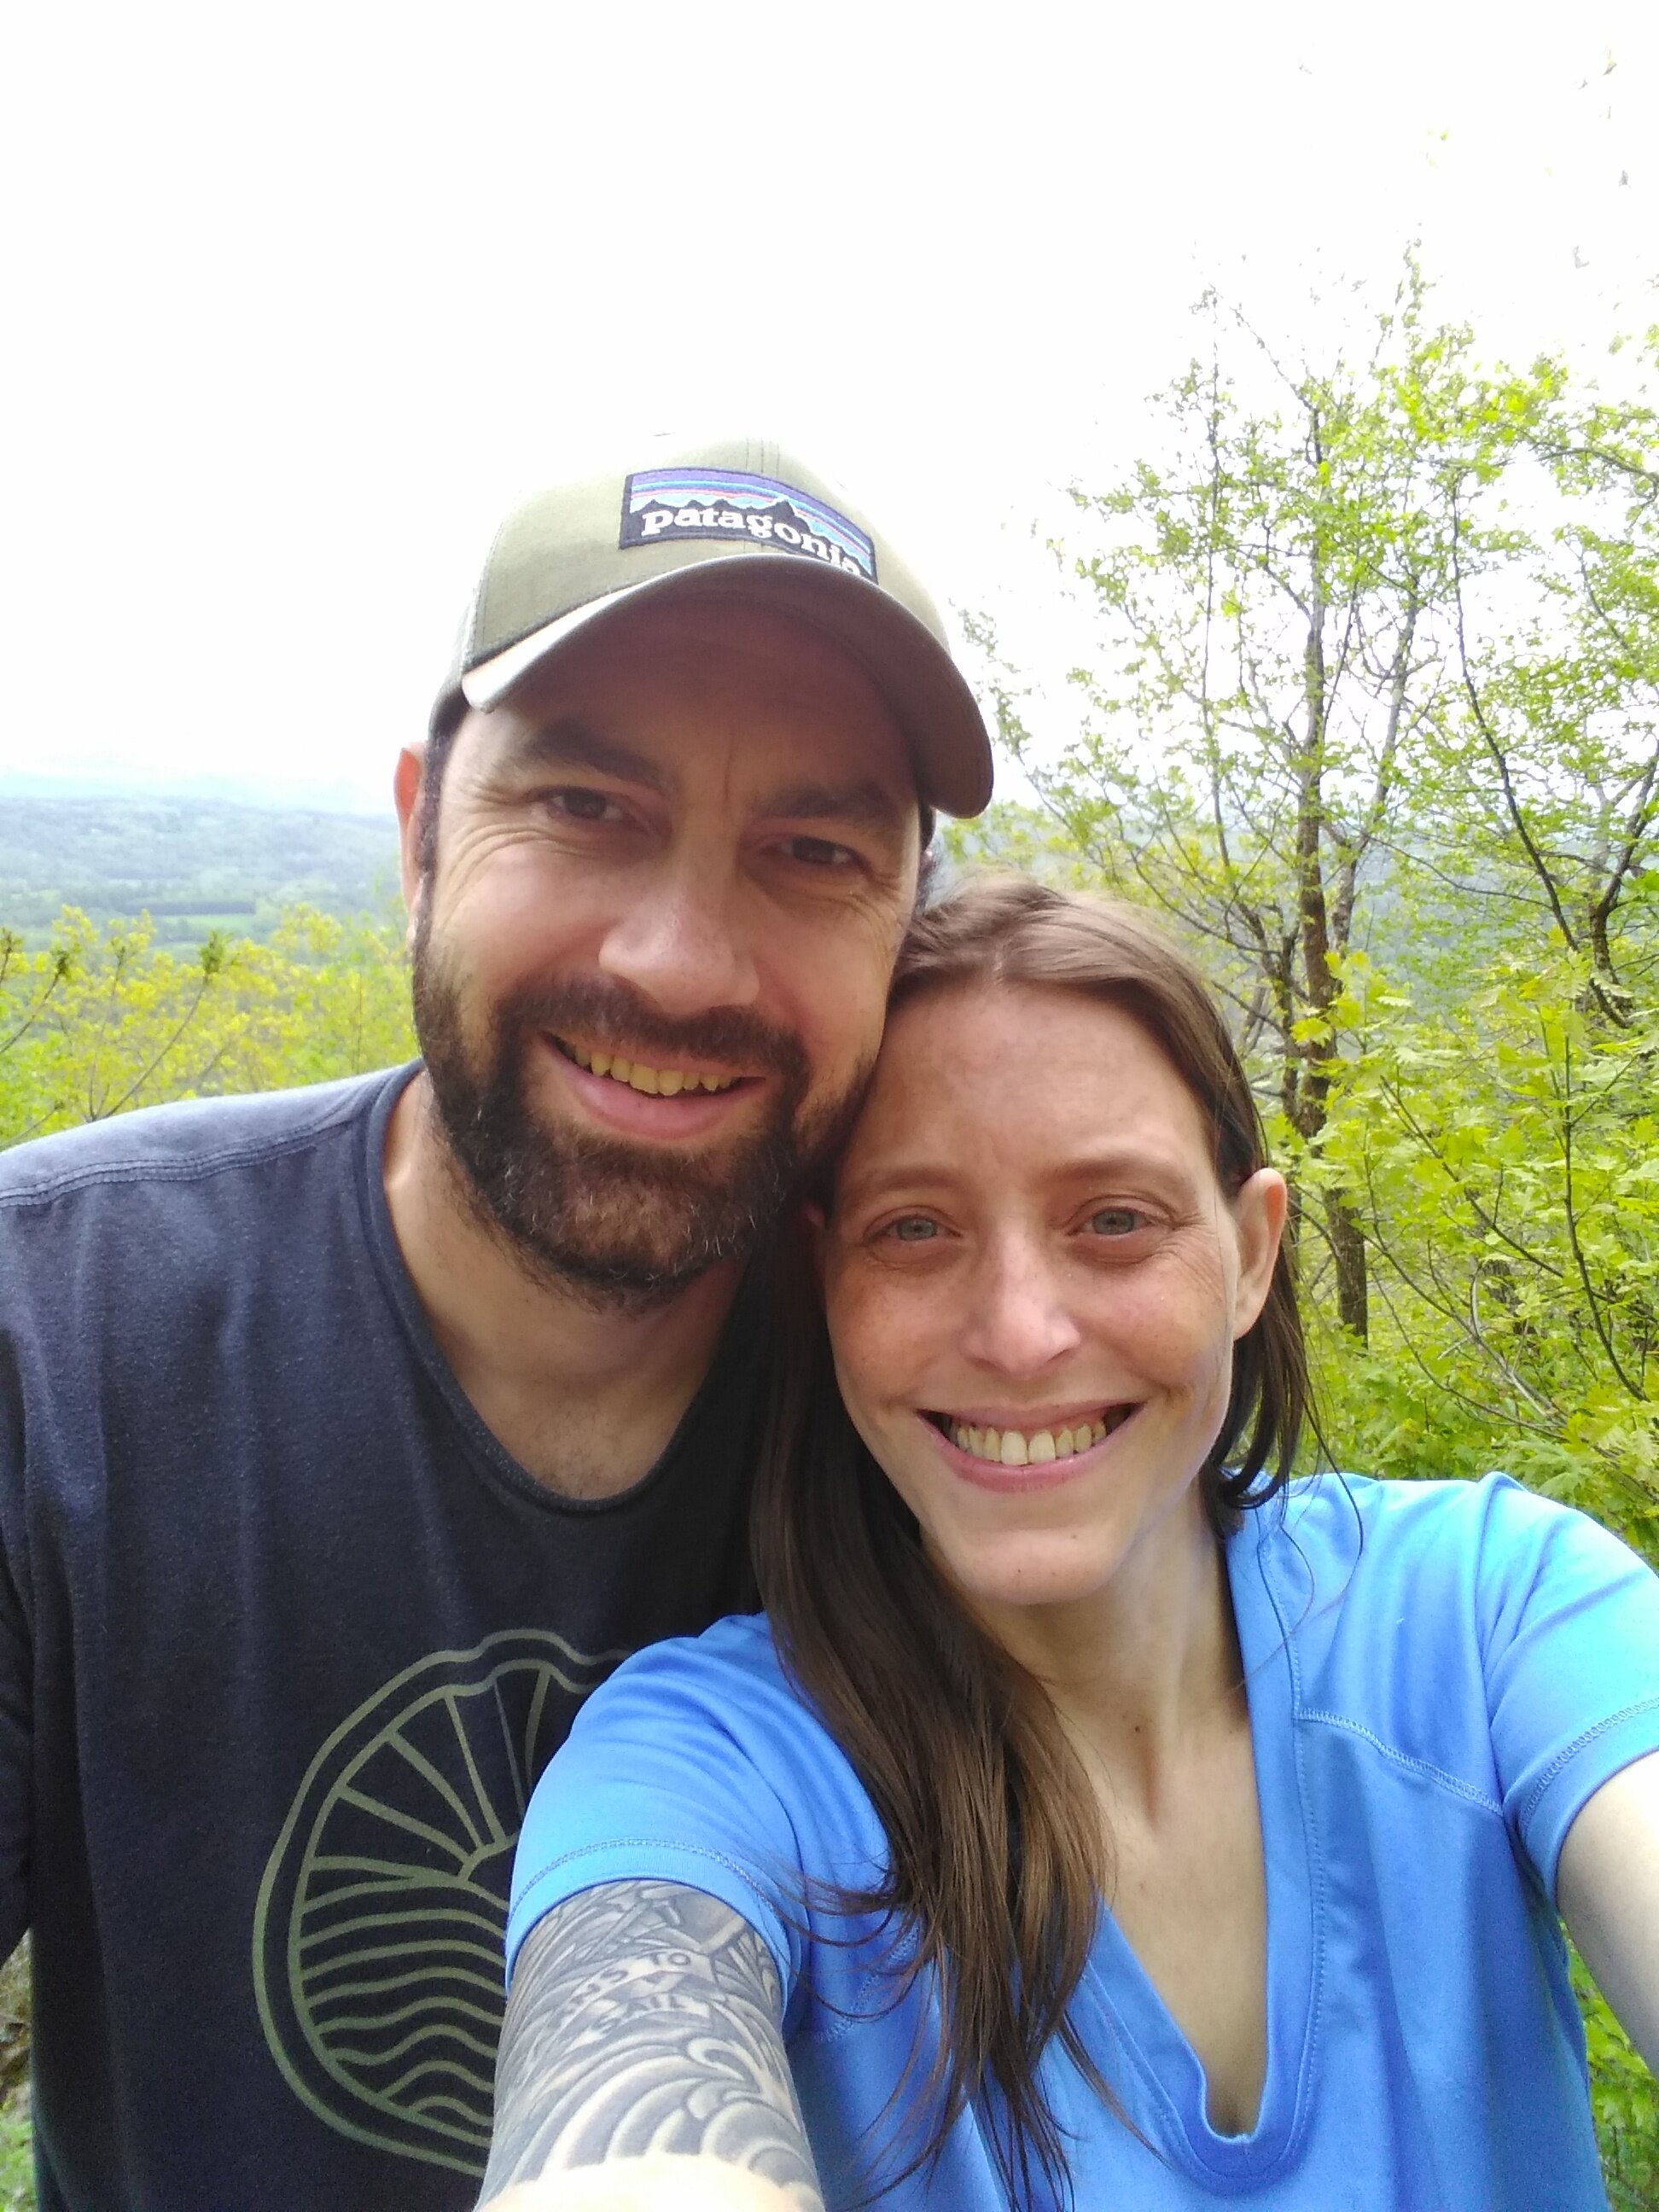 The blog author and her long-term hiking and adventure partner, Ryan outside, smiling, with trees and a mountain behind them.